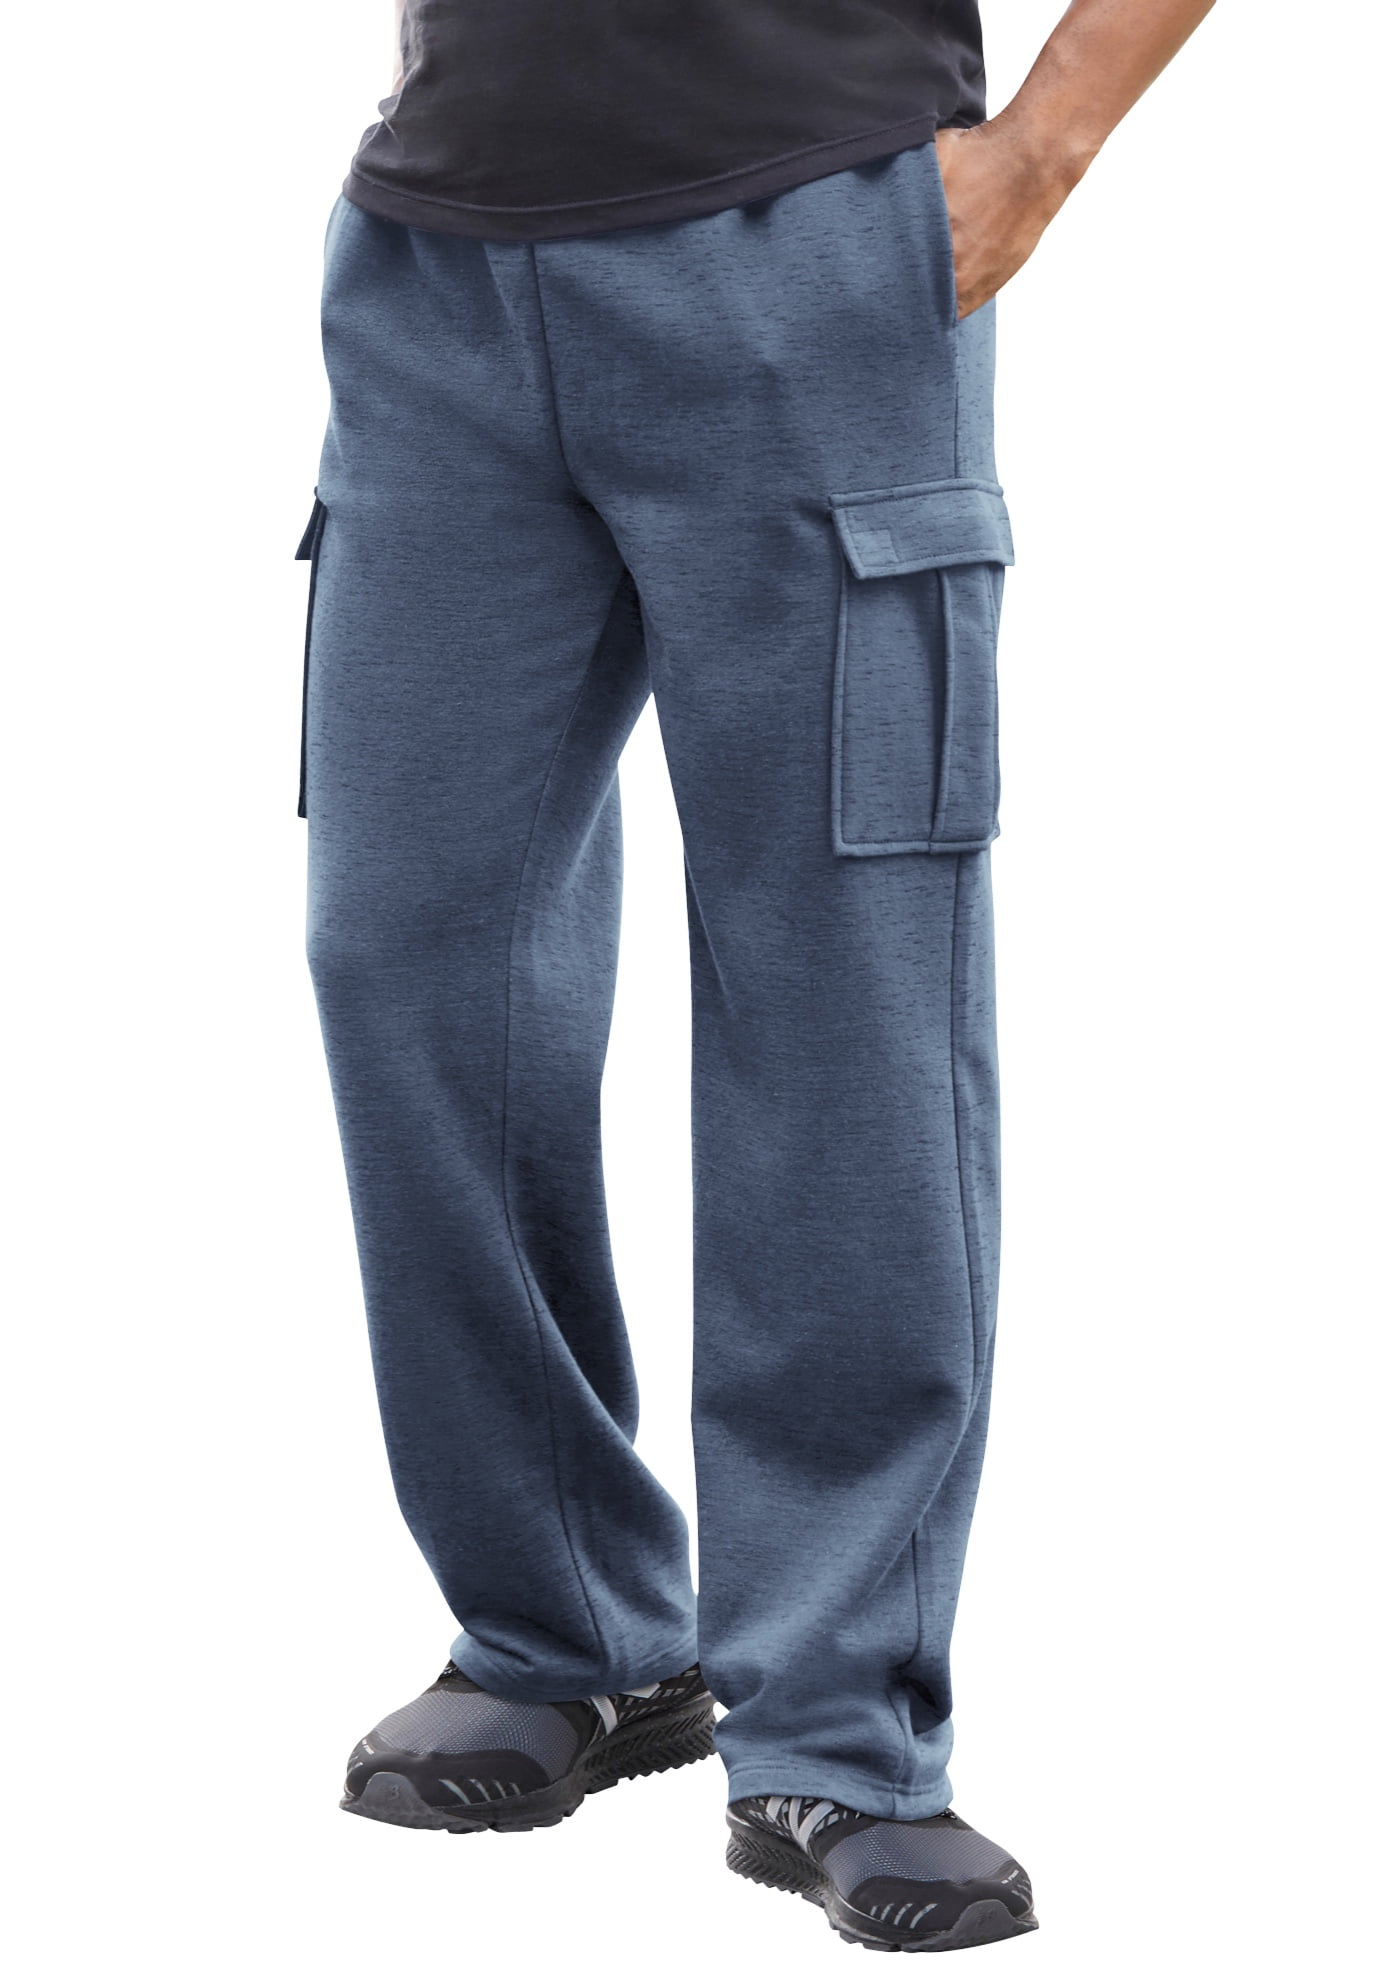 KingSize Men's Big & Tall Relaxed Fit Cargo Denim Sweatpants - Tall - L,  Stonewash Jeans at  Men's Clothing store